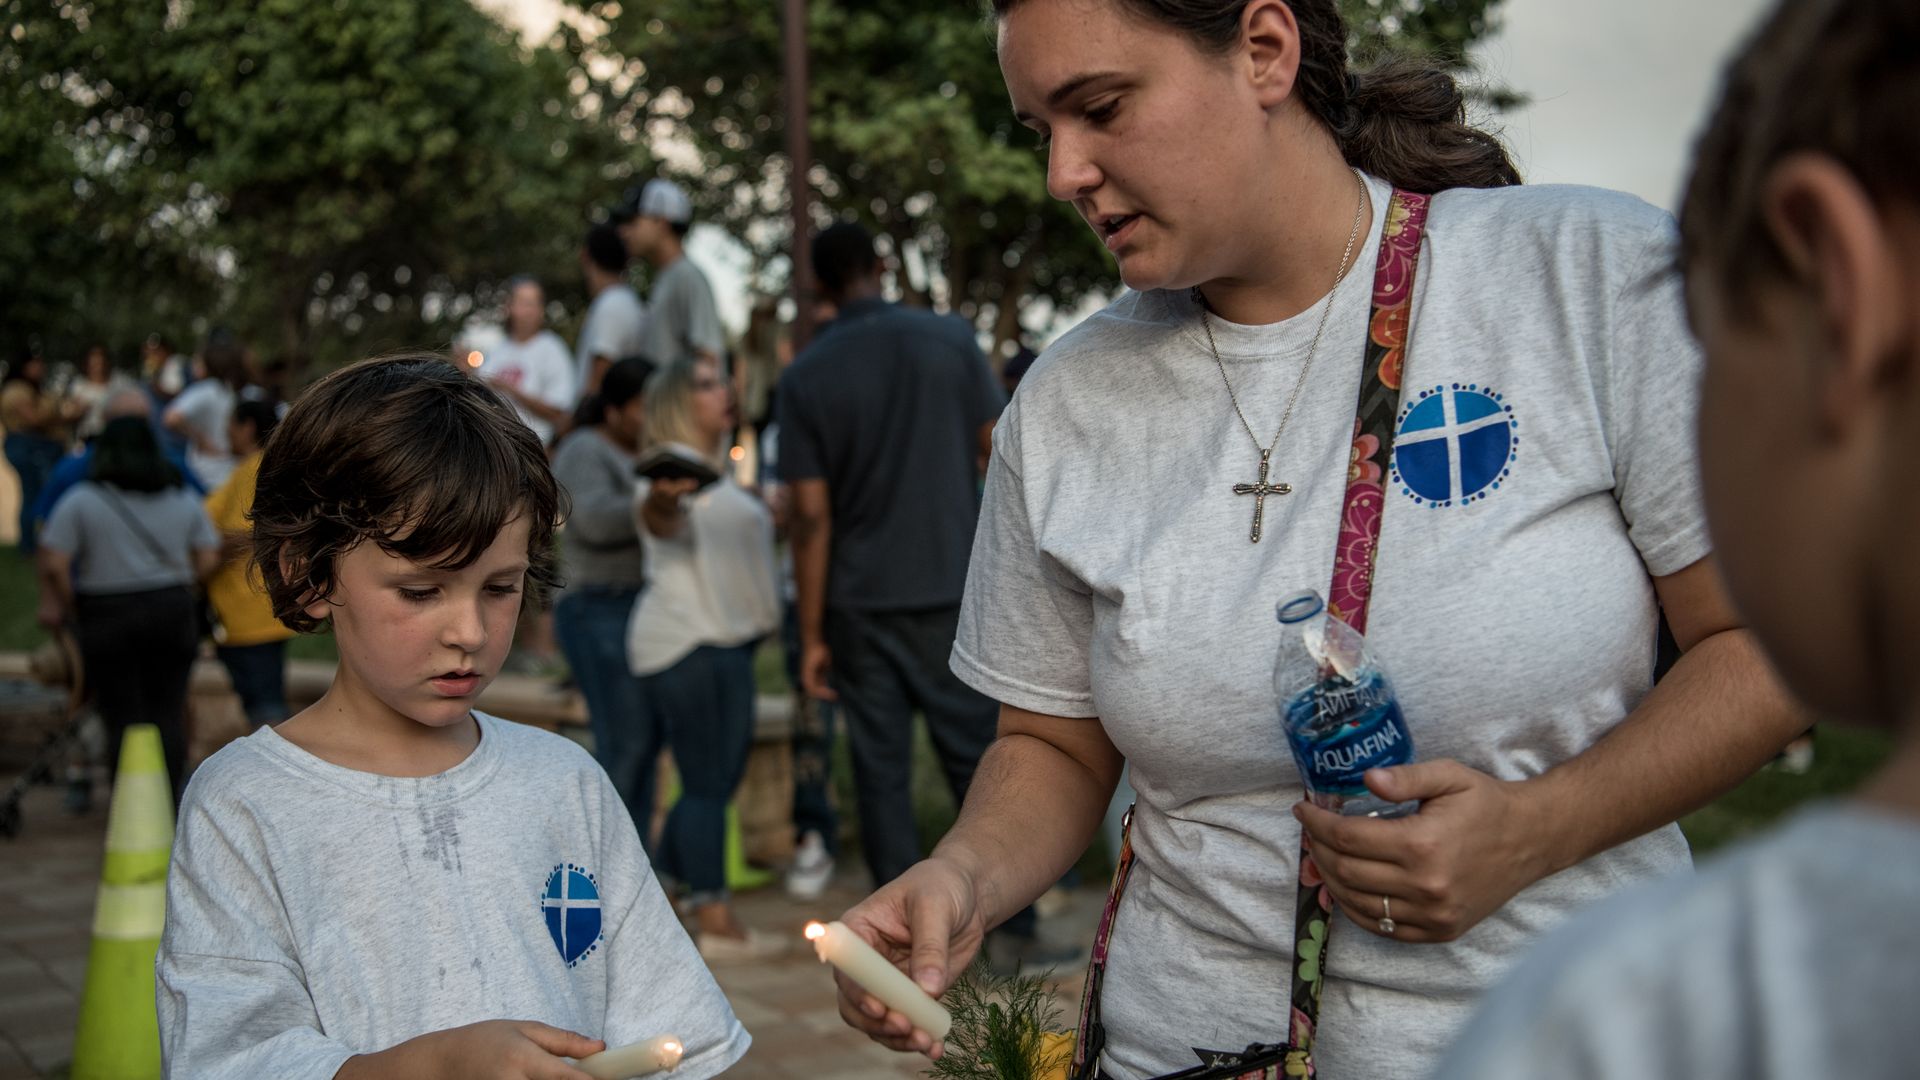 Katelyn Cooper, 26, and her two sons Trevor, 5, and Bronston, 7, light candles at the end of the prayer vigil at the University of Texas of the Permian Basin